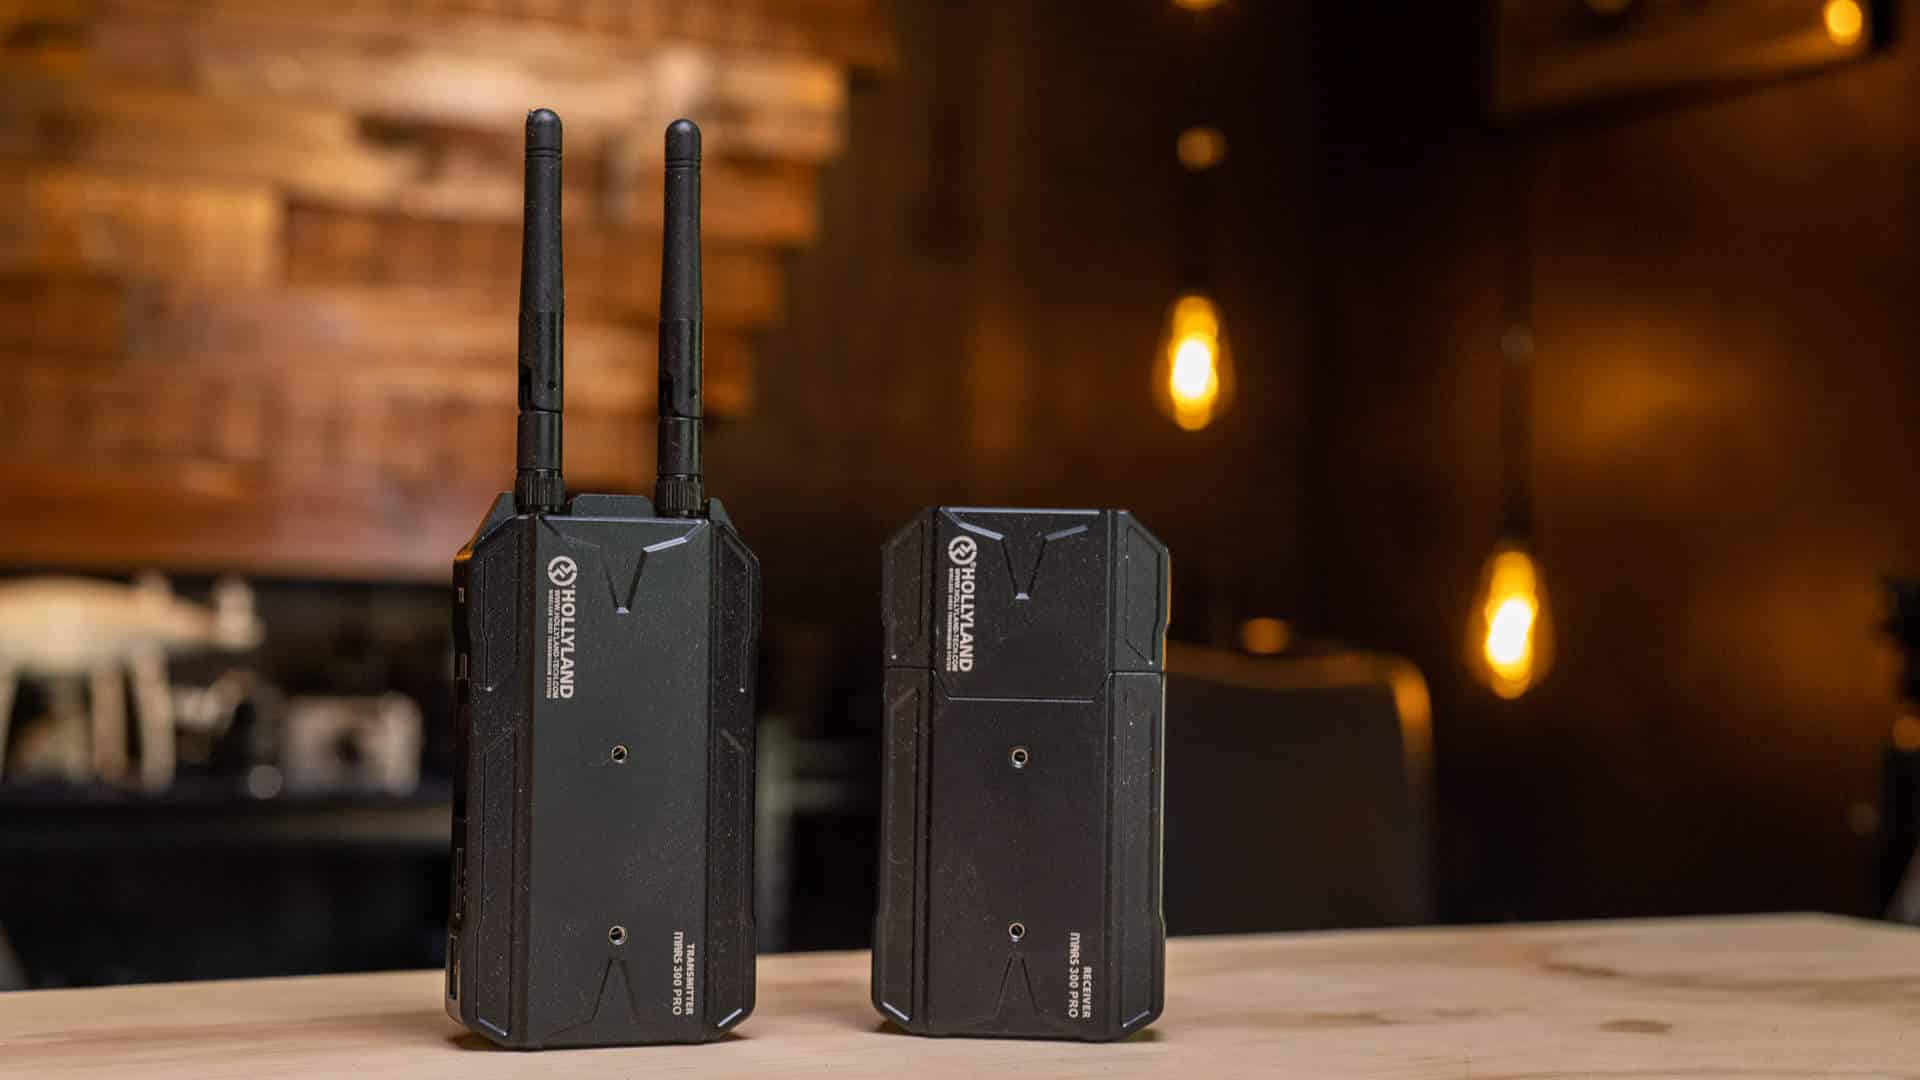 The Hollyland Mars 300 Pro Wireless HDMI is a compact transmitter and receiver system